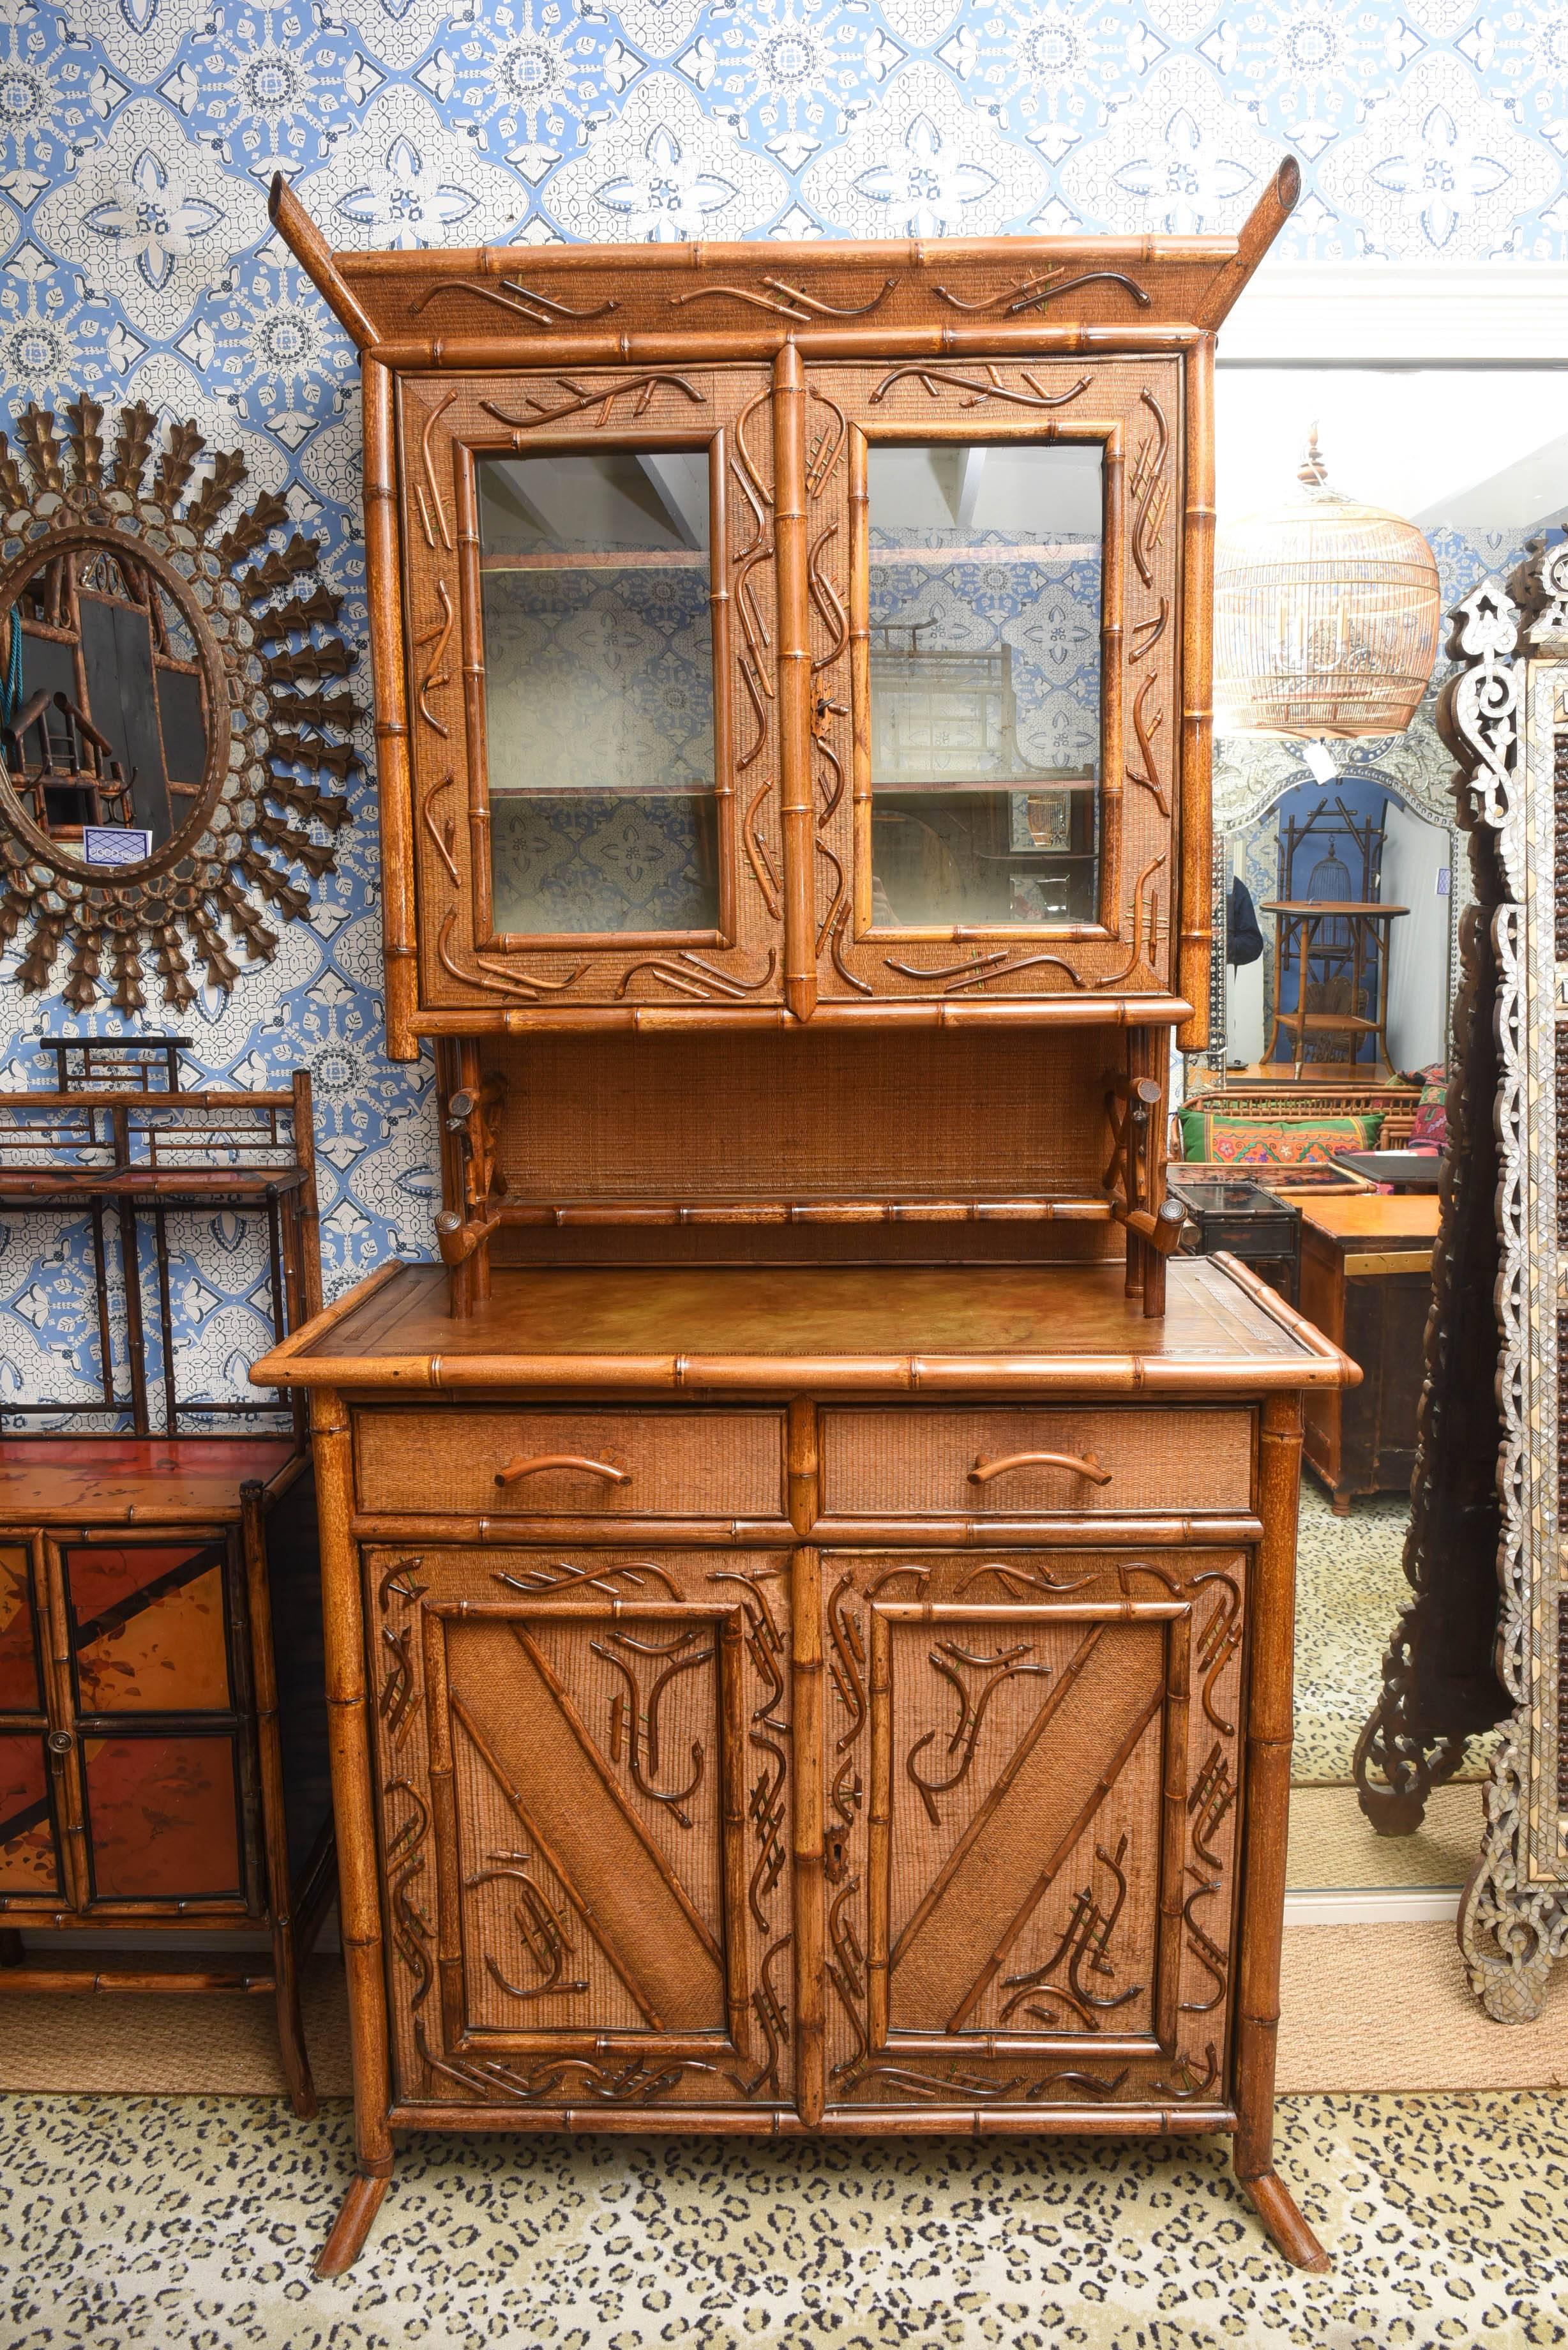 Late 19th or early 20th century English two-part bamboo cupboard, the upper cabinet with glass fronted storage, over a two drawer, two door base cabinet with tooled leather top, the door panels with applied bamboo decoration, Measures: 92